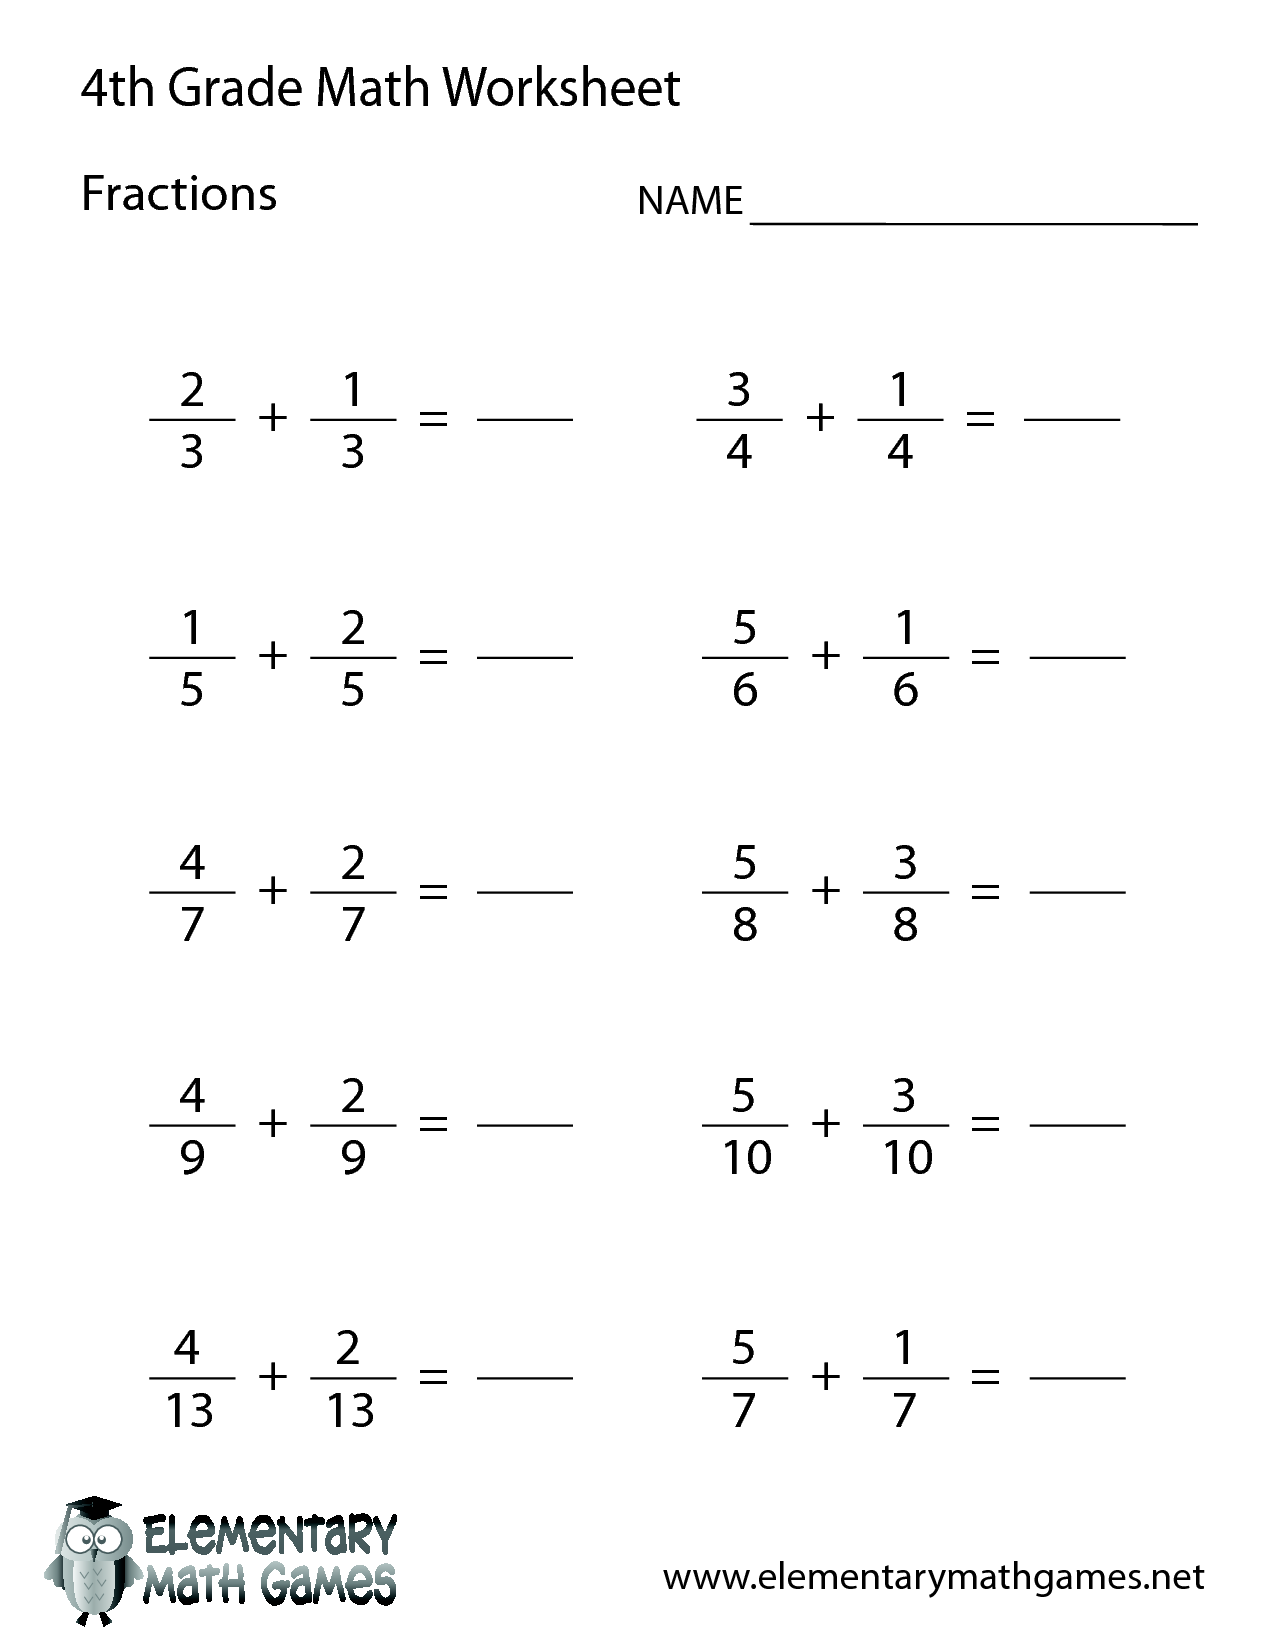 5 Best Images of For 4th Grade Math Worksheets With Answer